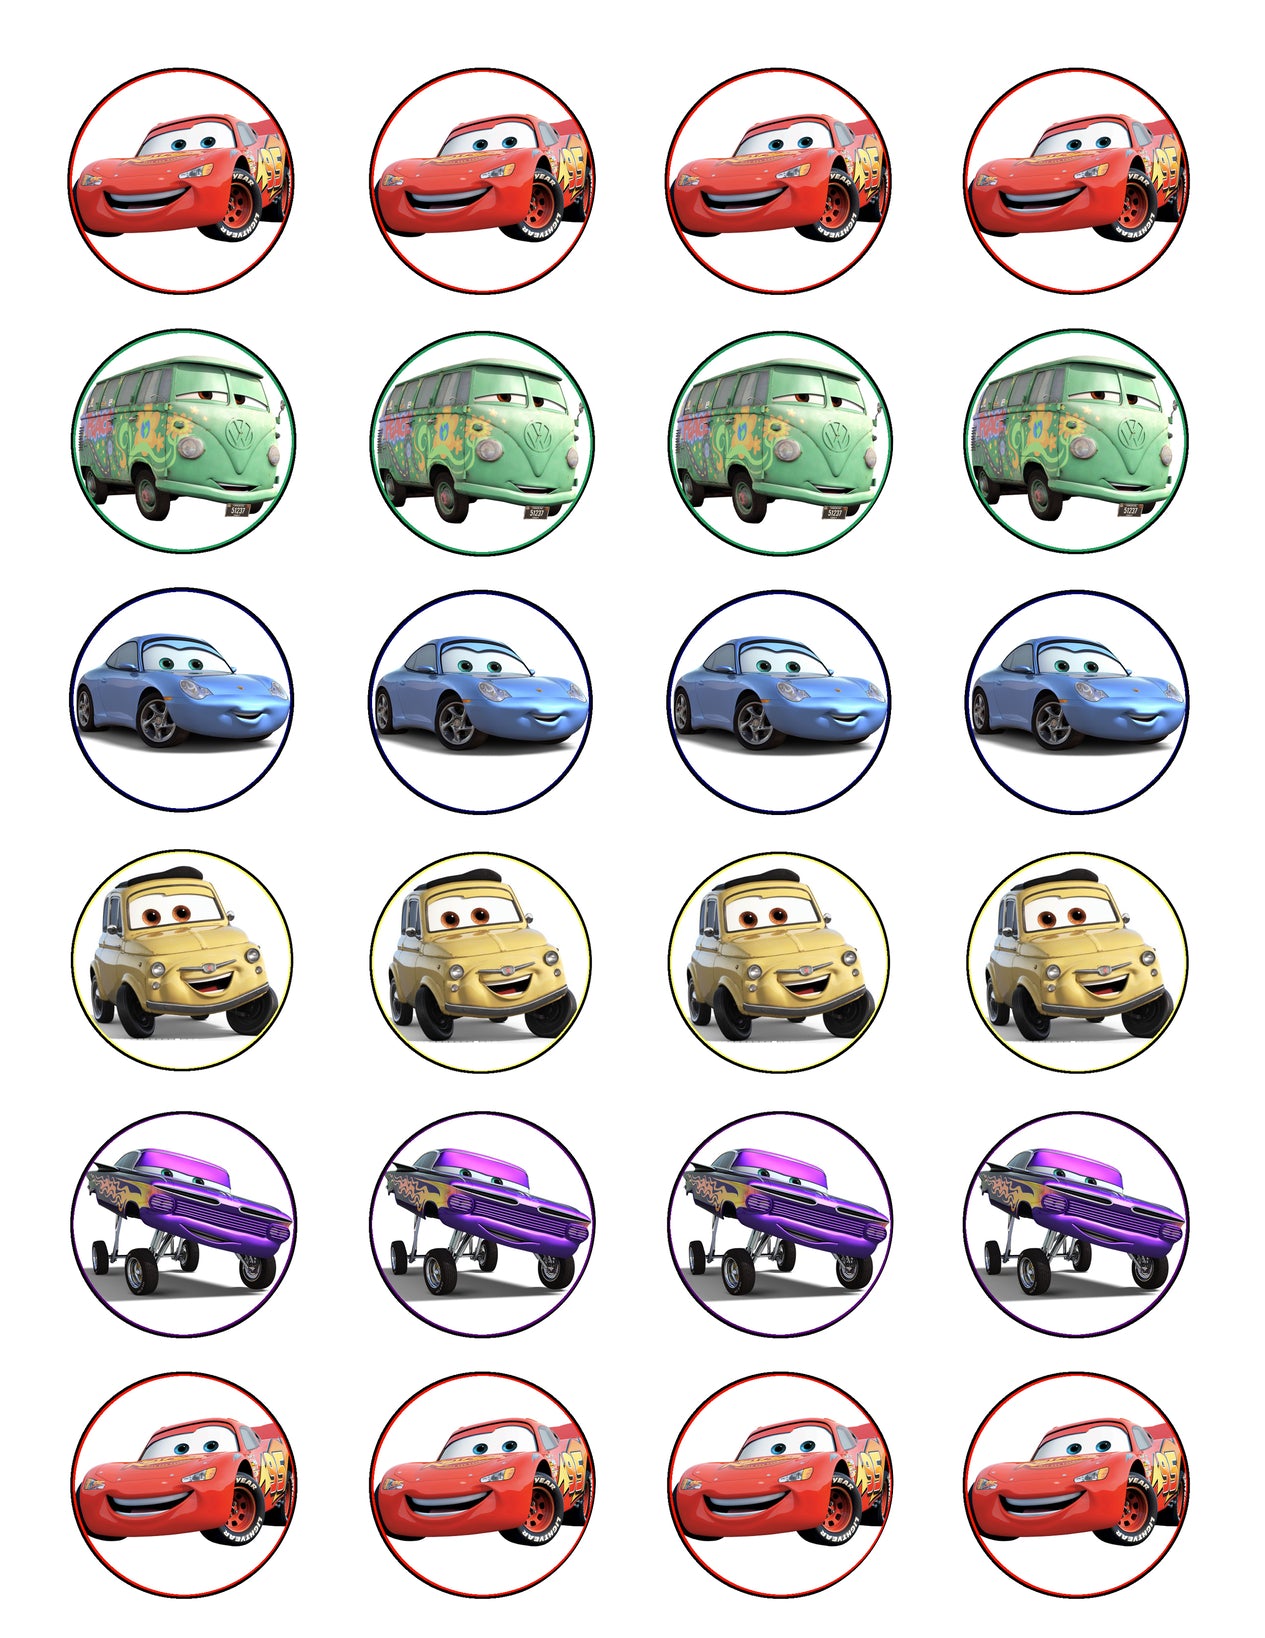 Cars 2 Lightening McQueen Sally Carrera Ramone and Fillmore Edible Cupcake Topper Images ABPID06674